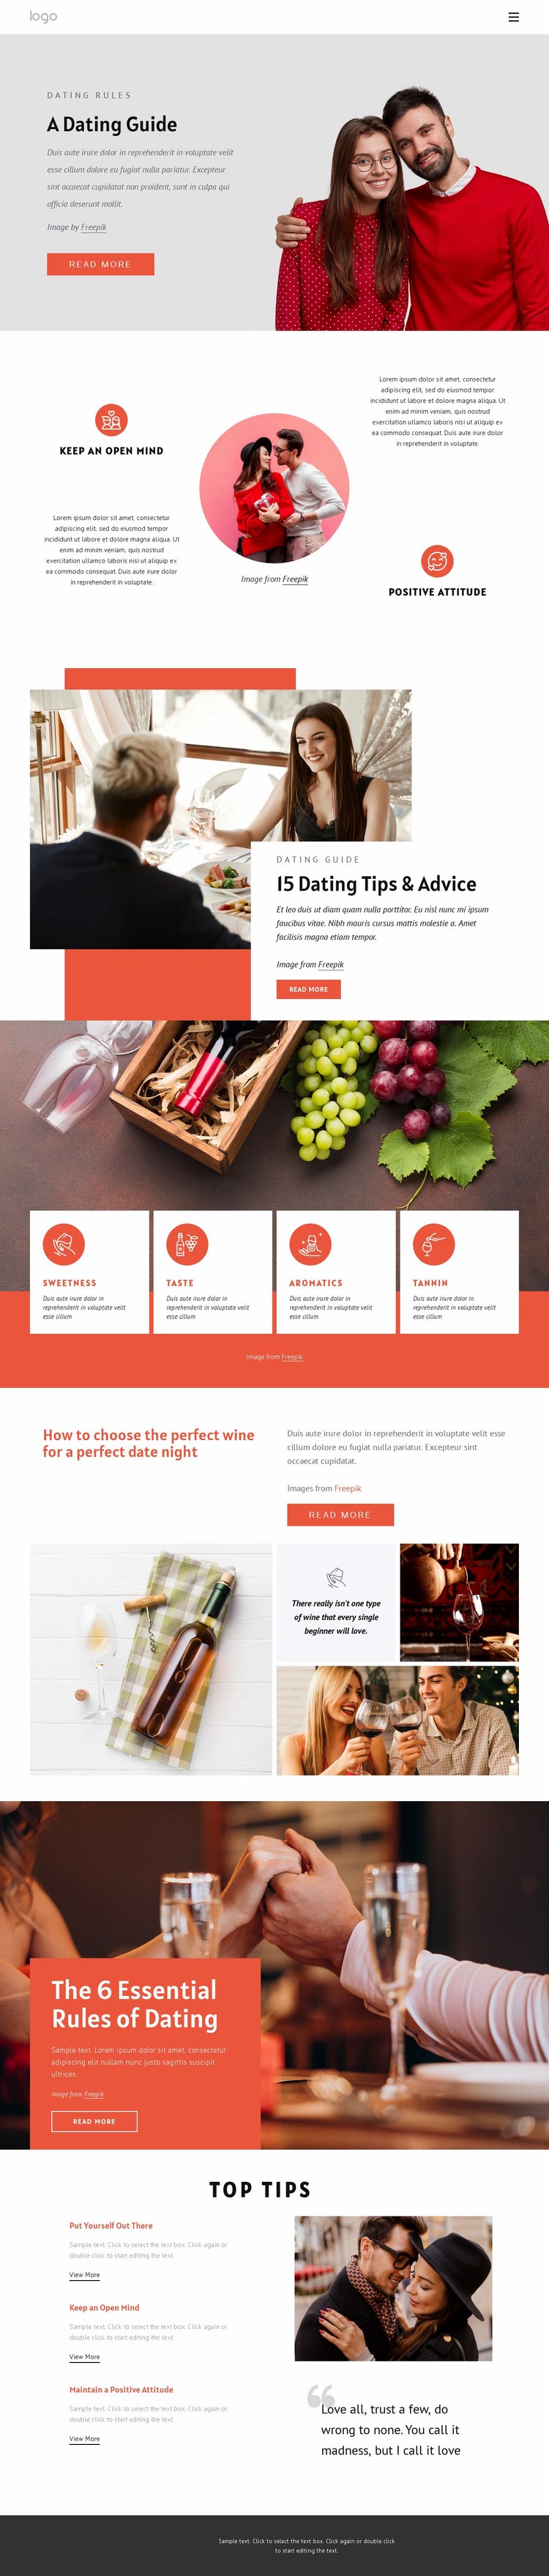 Dating guide Squarespace Template Alternative